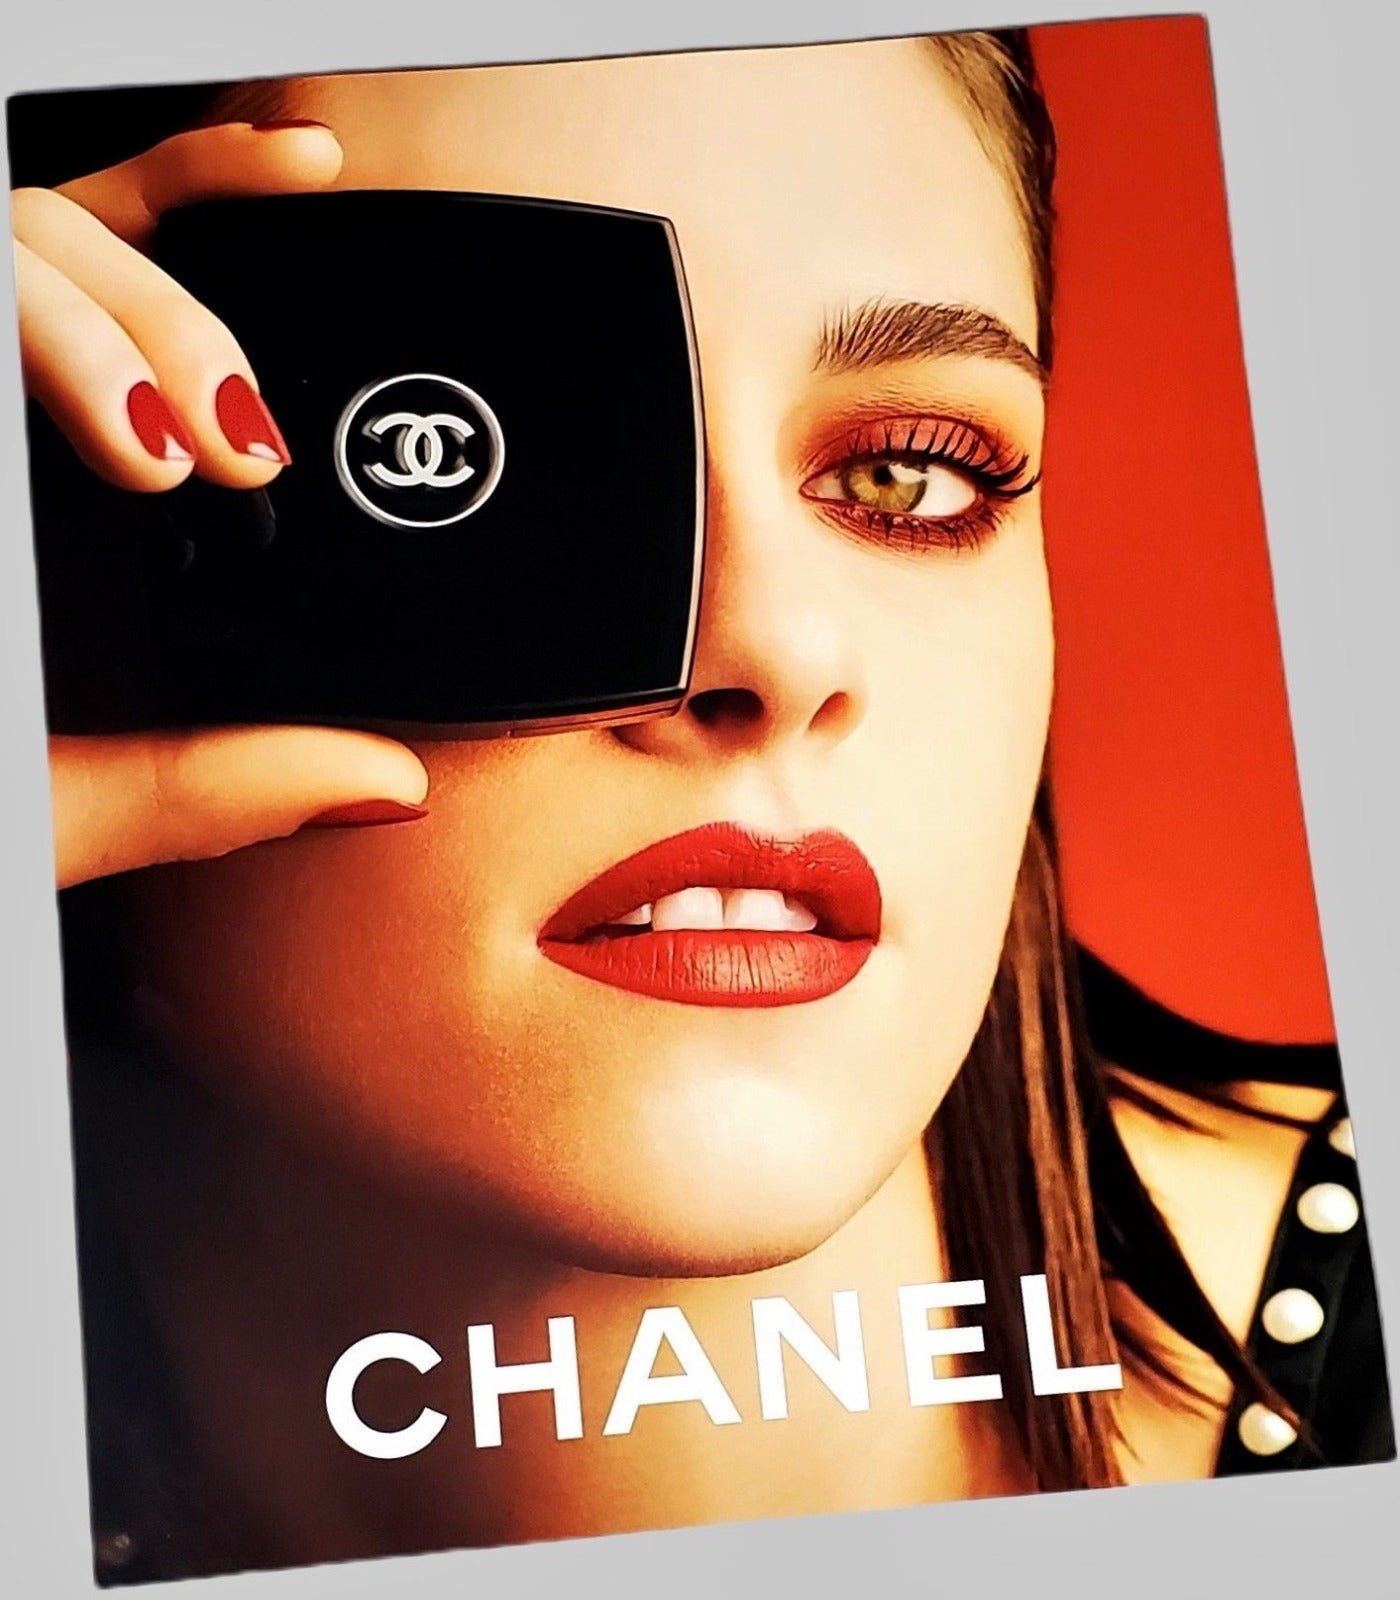 Kristen Stewart for Chanel advertisement featured in September 2016 Vogue magazine available in area51gallery